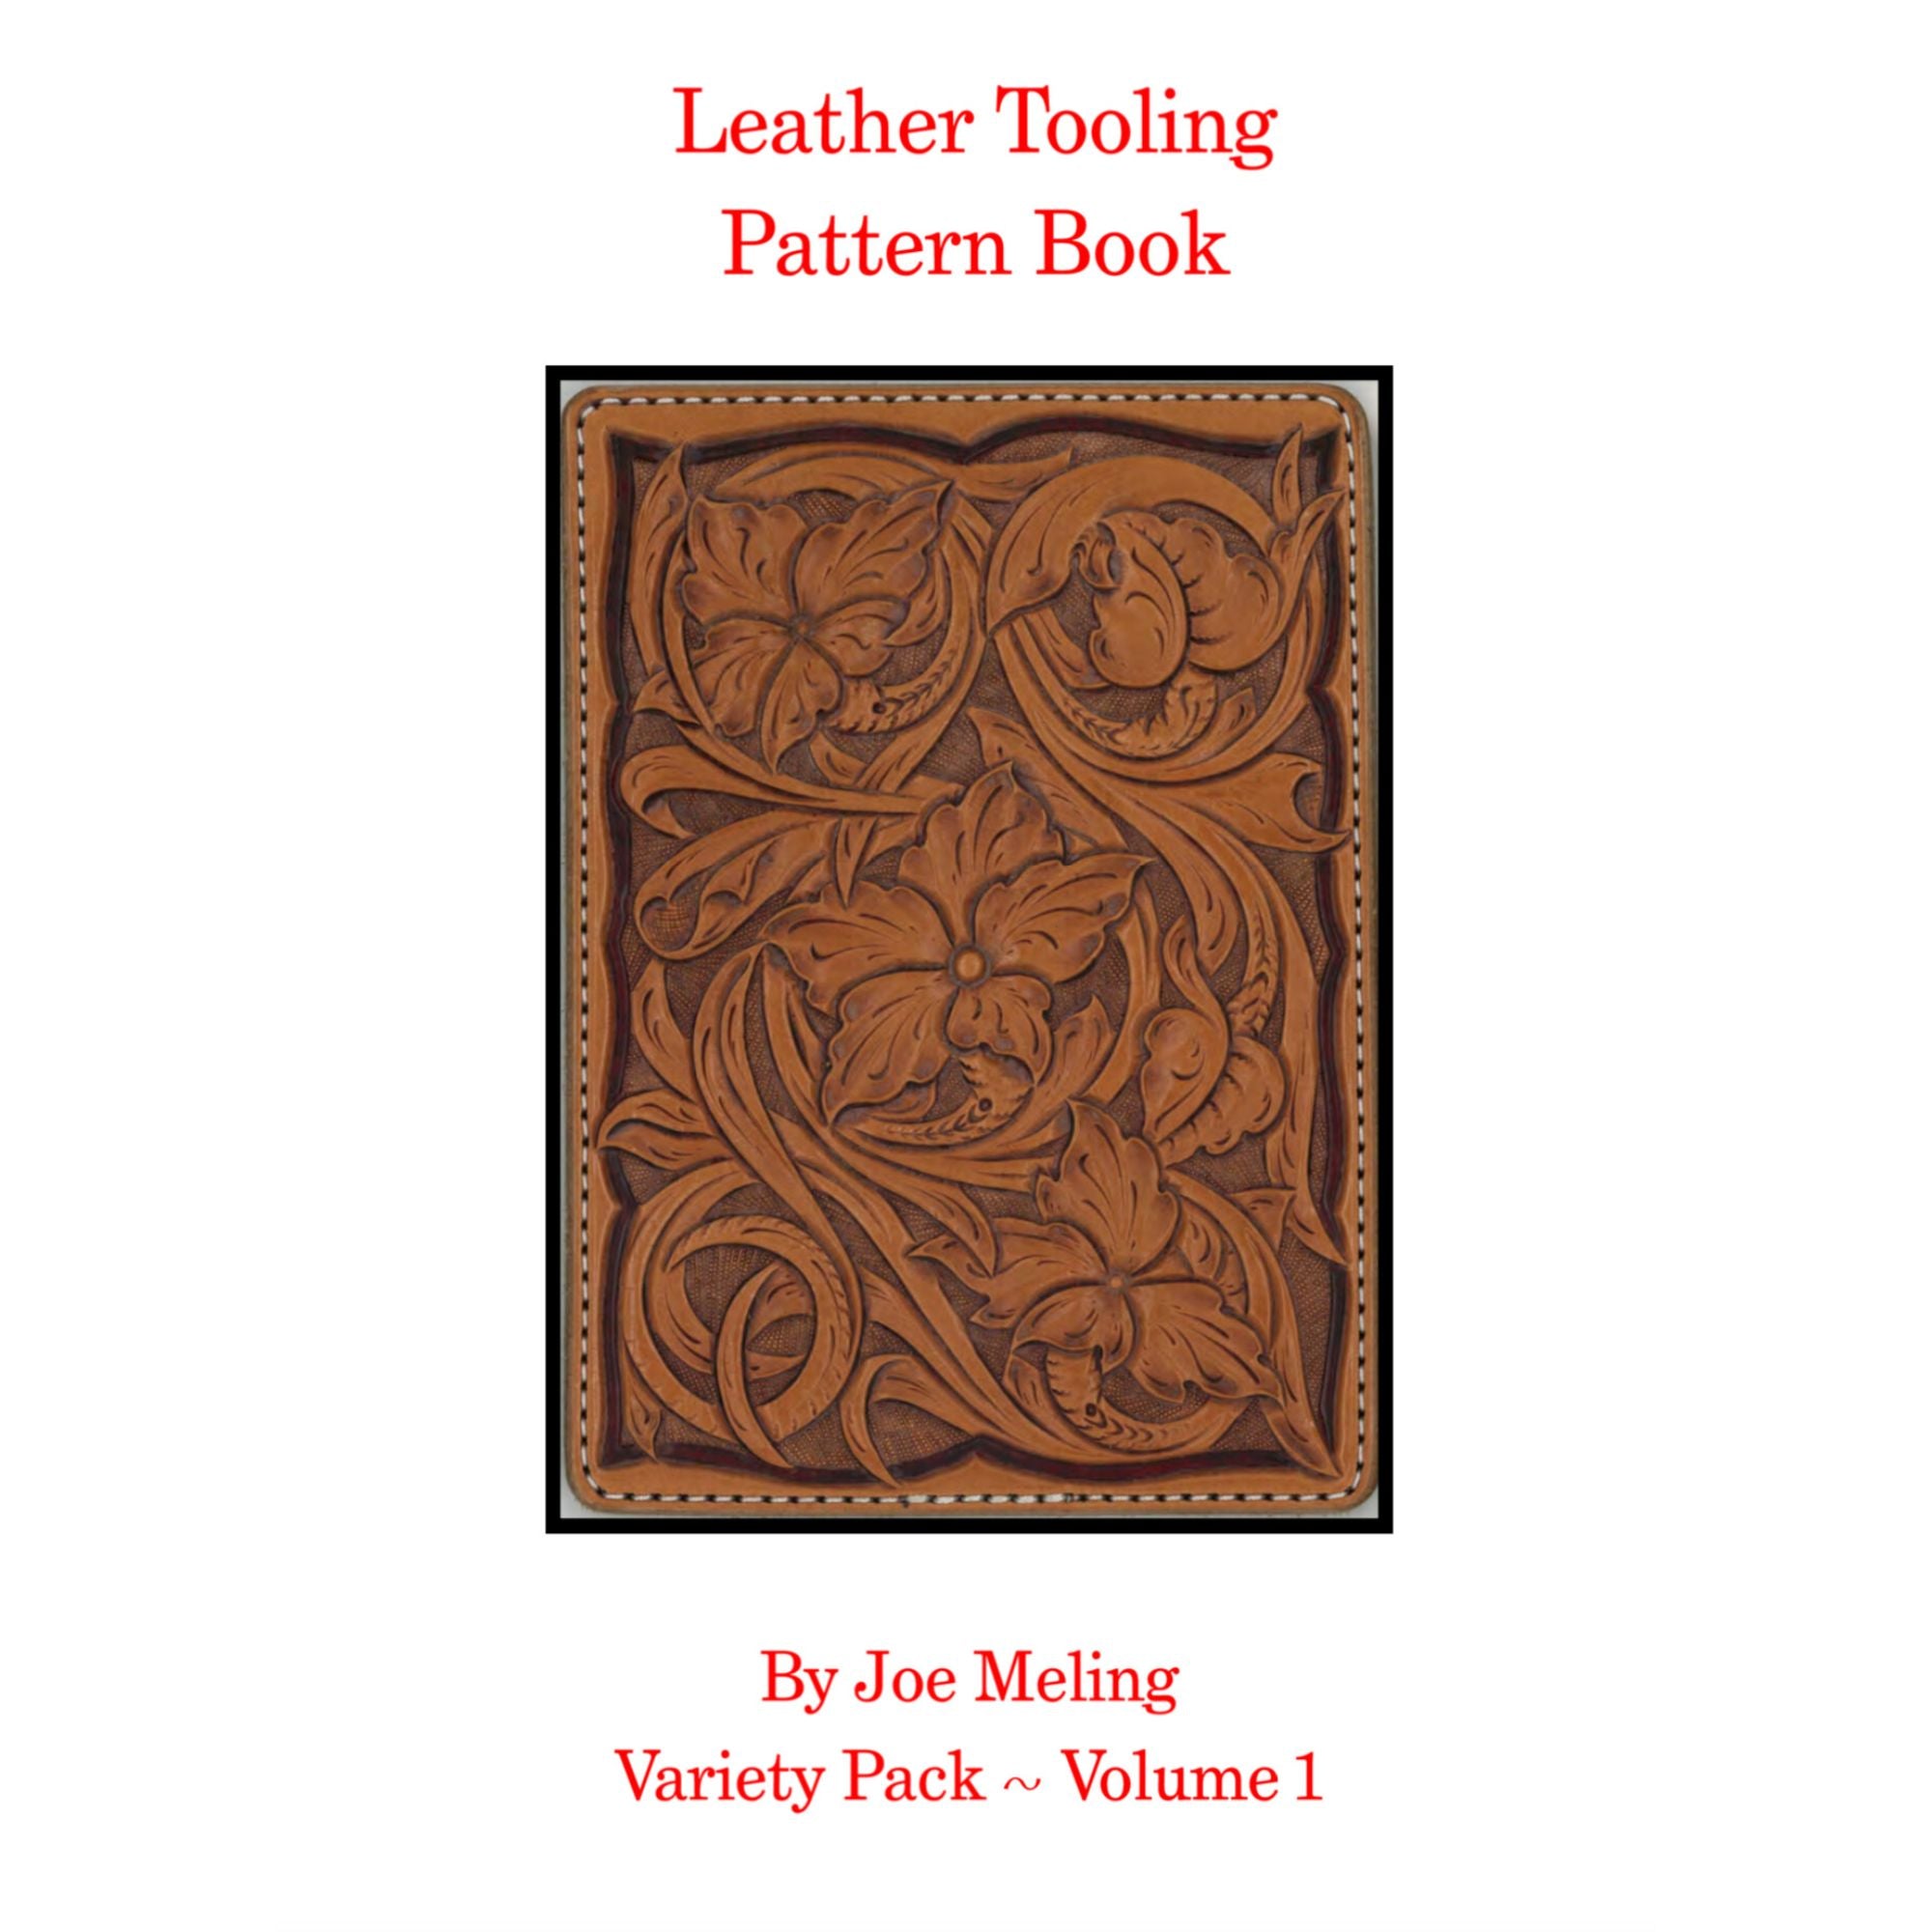 (Digital) Leather Tooling Pattern Book Vol 1